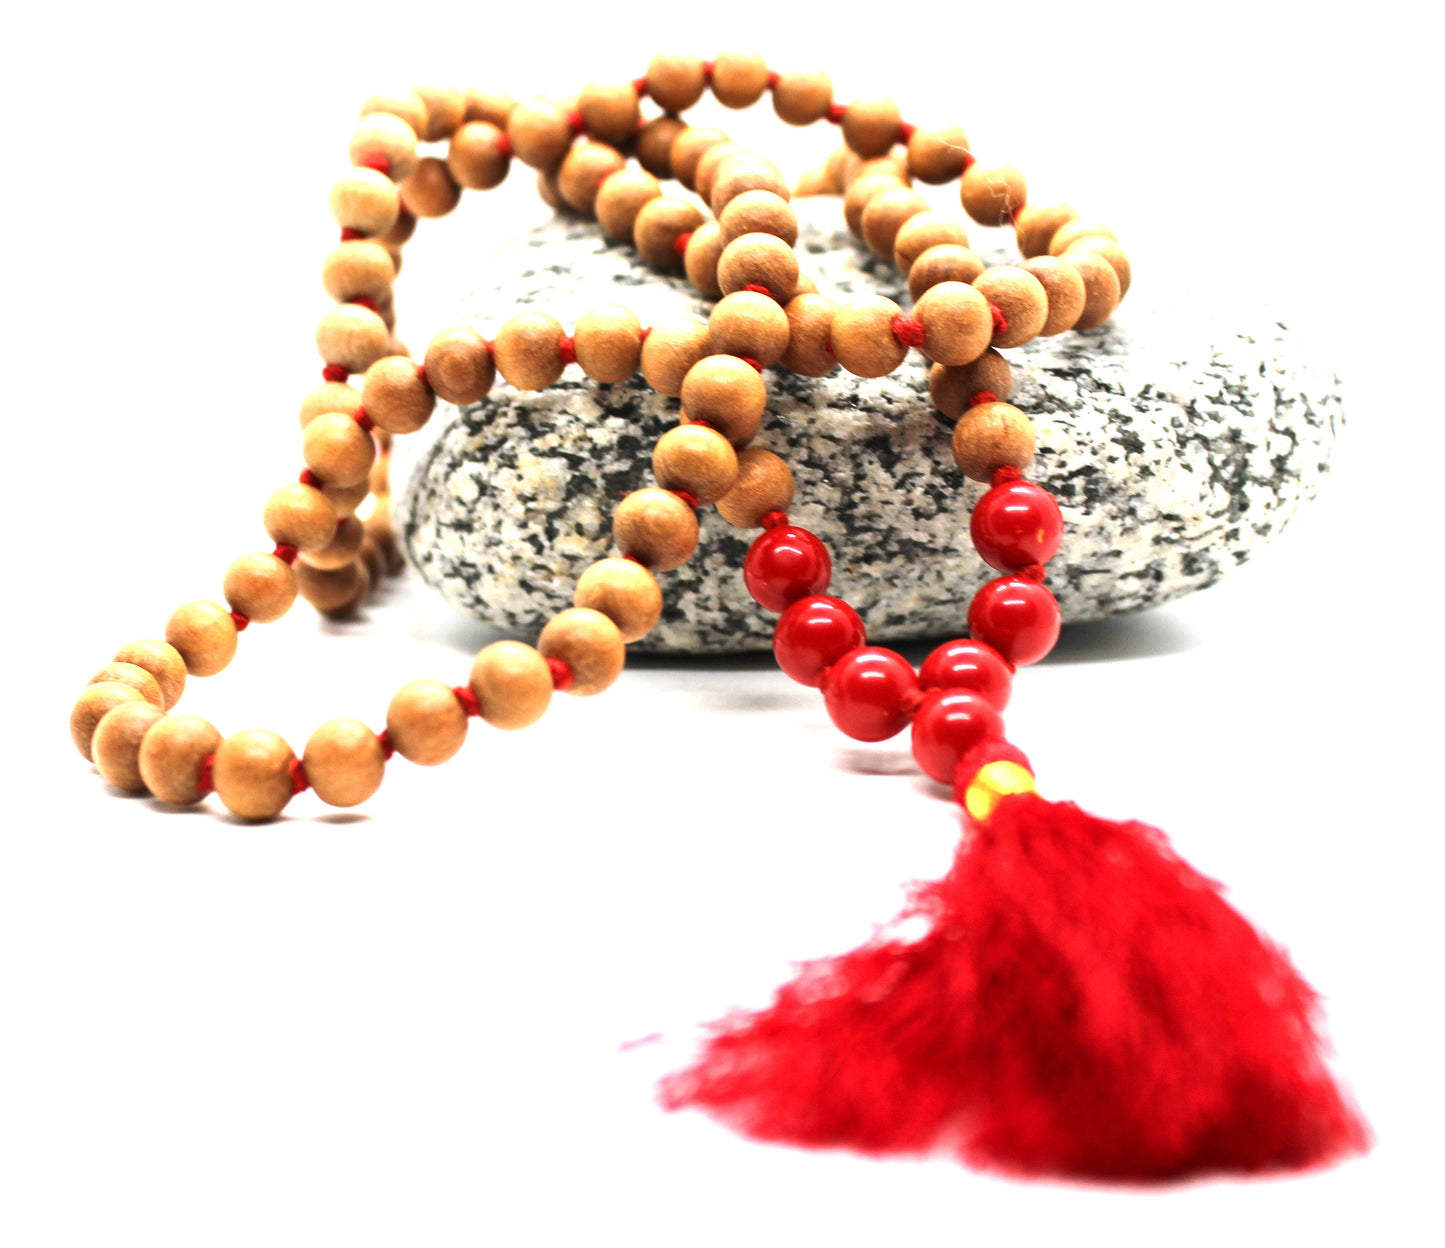 Sandalwood - RED CORAL Mala Necklace 8 mm, Knotted Sandalwood Mala, 108 Japa Mala Beads, Sandalwood Necklace, Buddhist Red Coral Beads